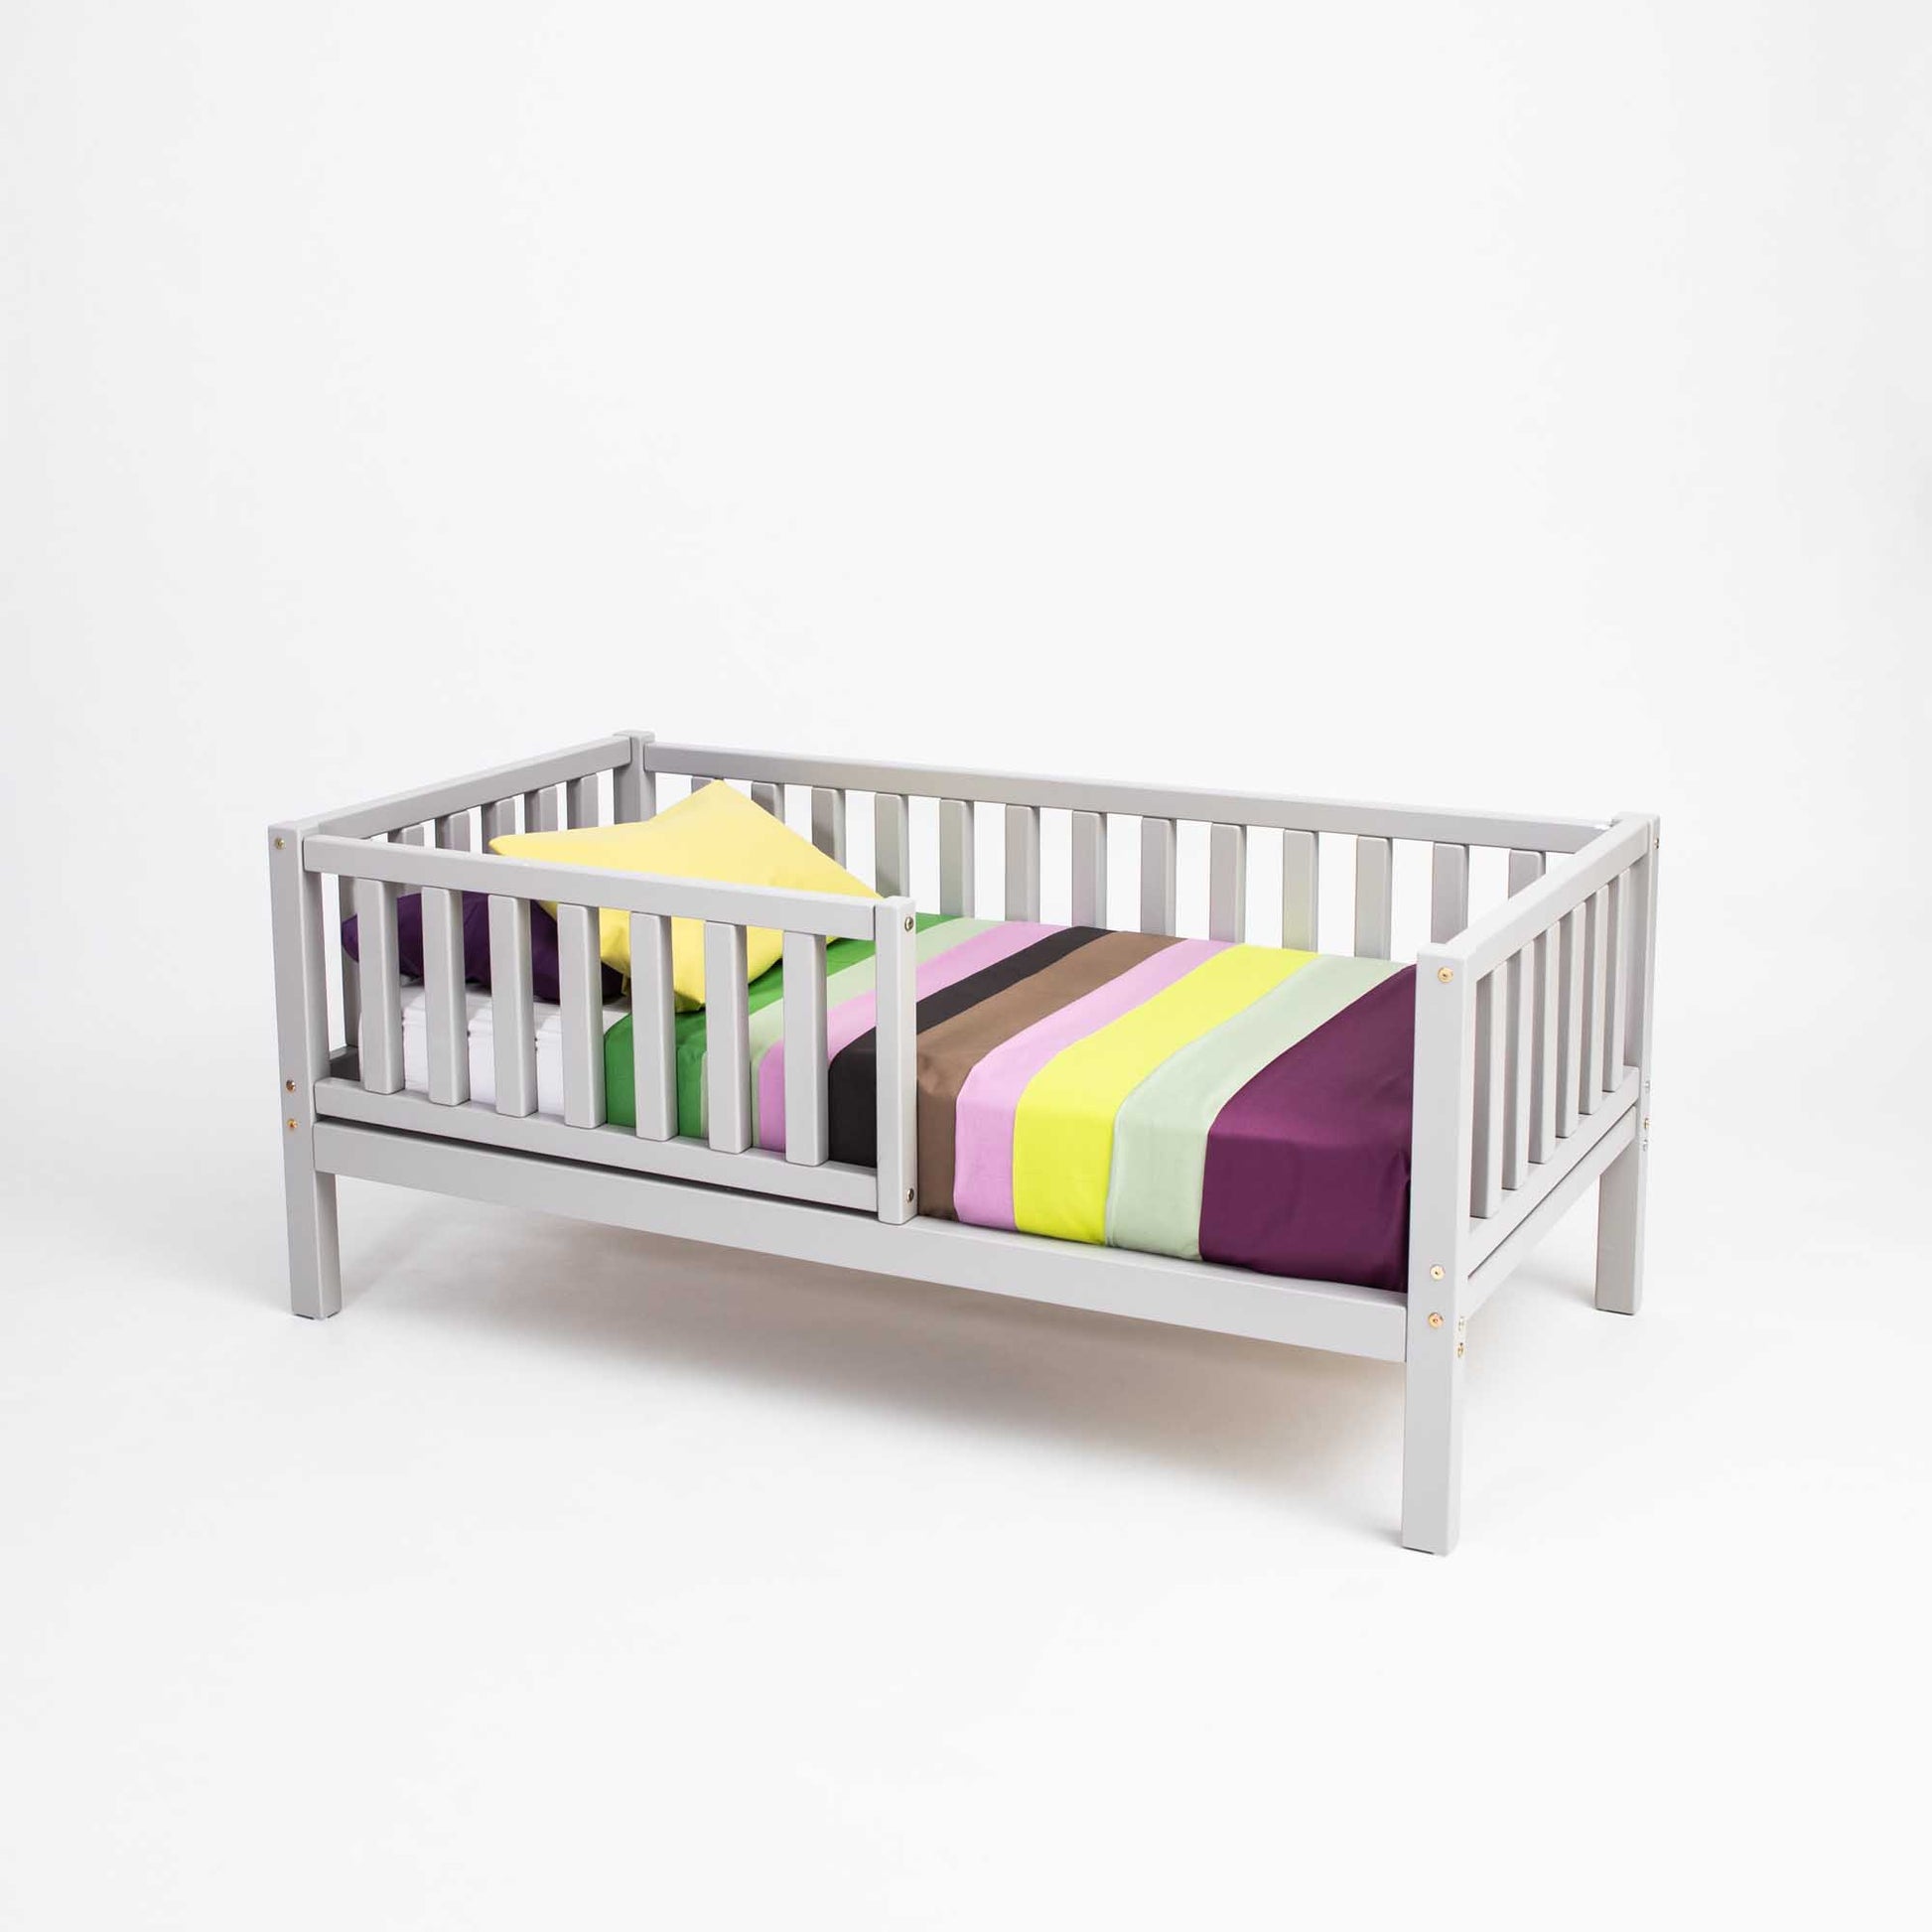 A Sweet Home From Wood toddler bed on legs with a fence, with a colorful striped sheet, perfect for independent sleeping.